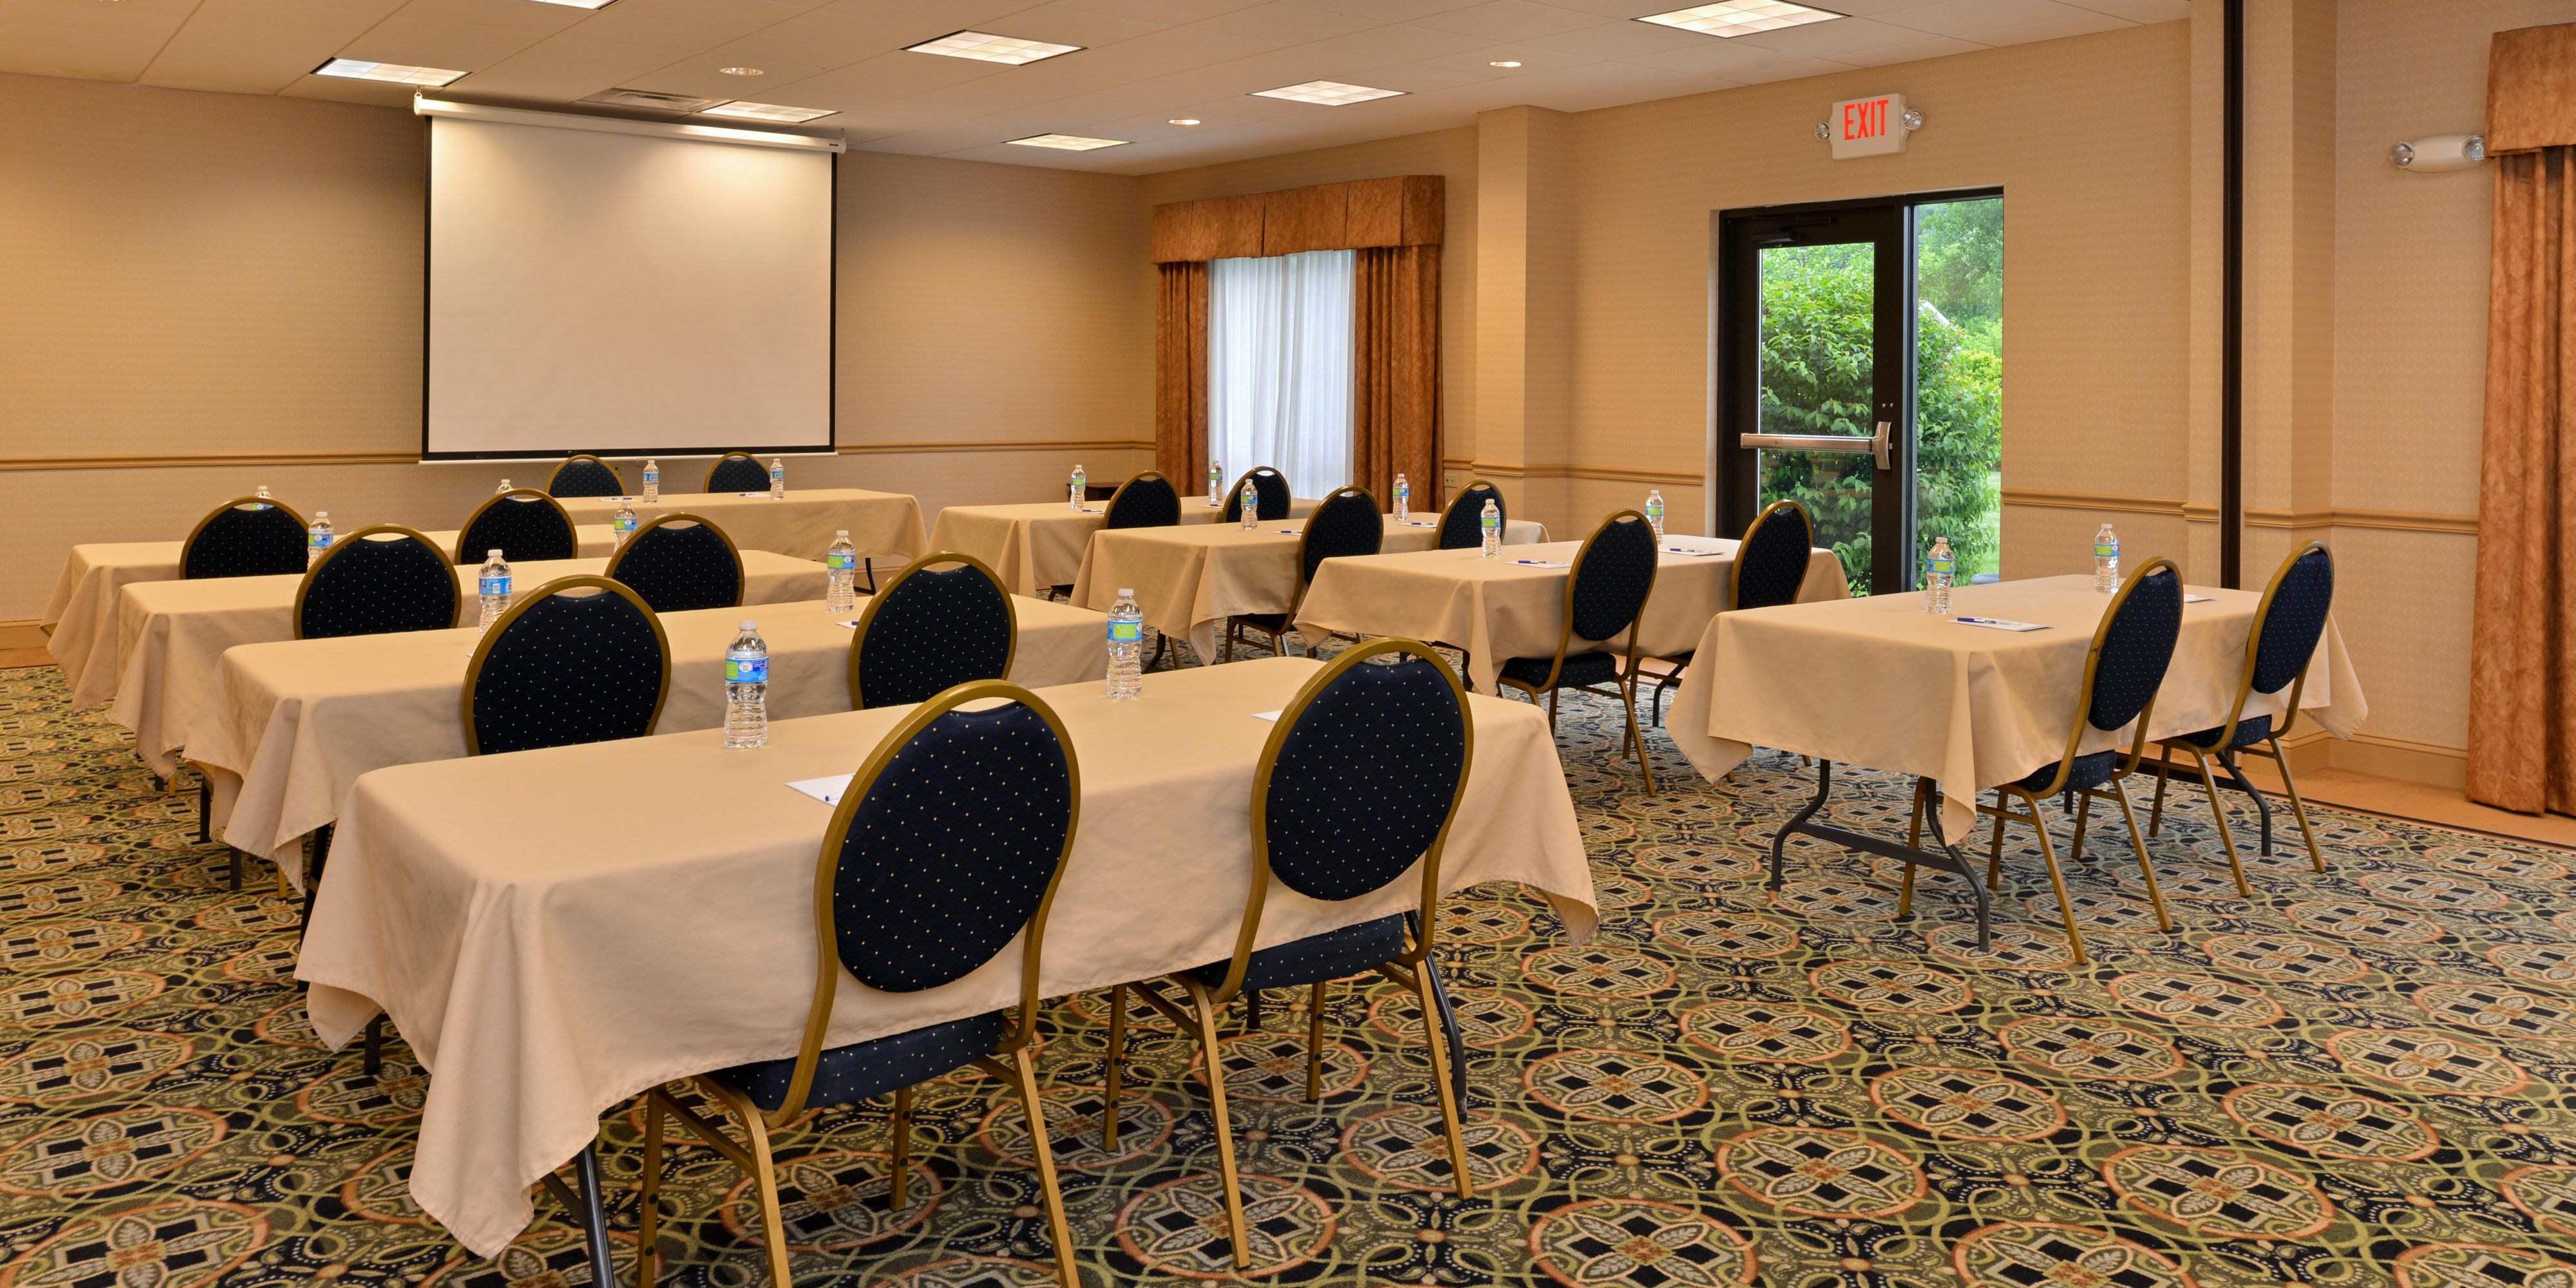 Our meeting space is available for rental for all types of events including corporate meetings, baby showers or employee parties. This space hosts up to 40 people and can be divided into smaller spaces to fit rental needs.
